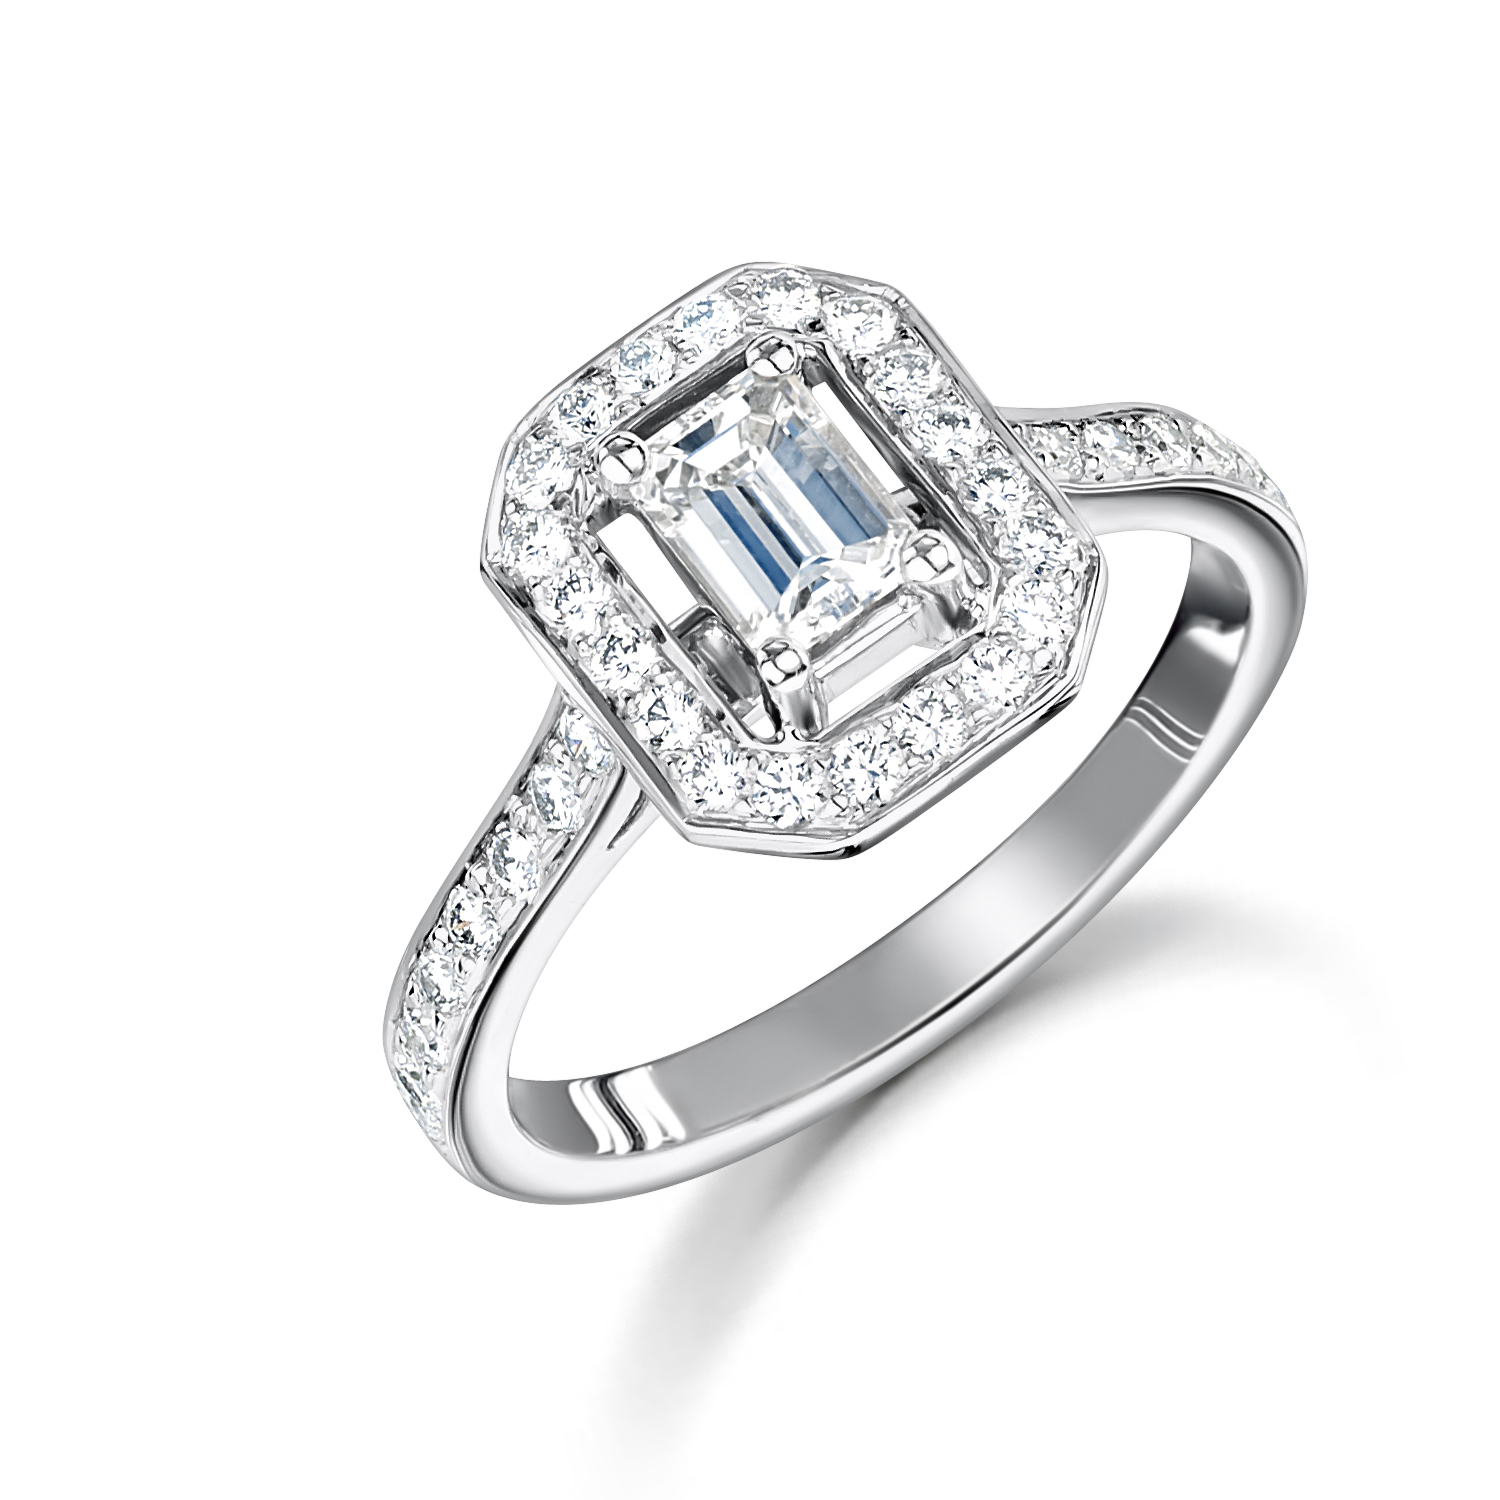 18ct White  Gold  Emerald  Cut Rail Engagement  Ring  